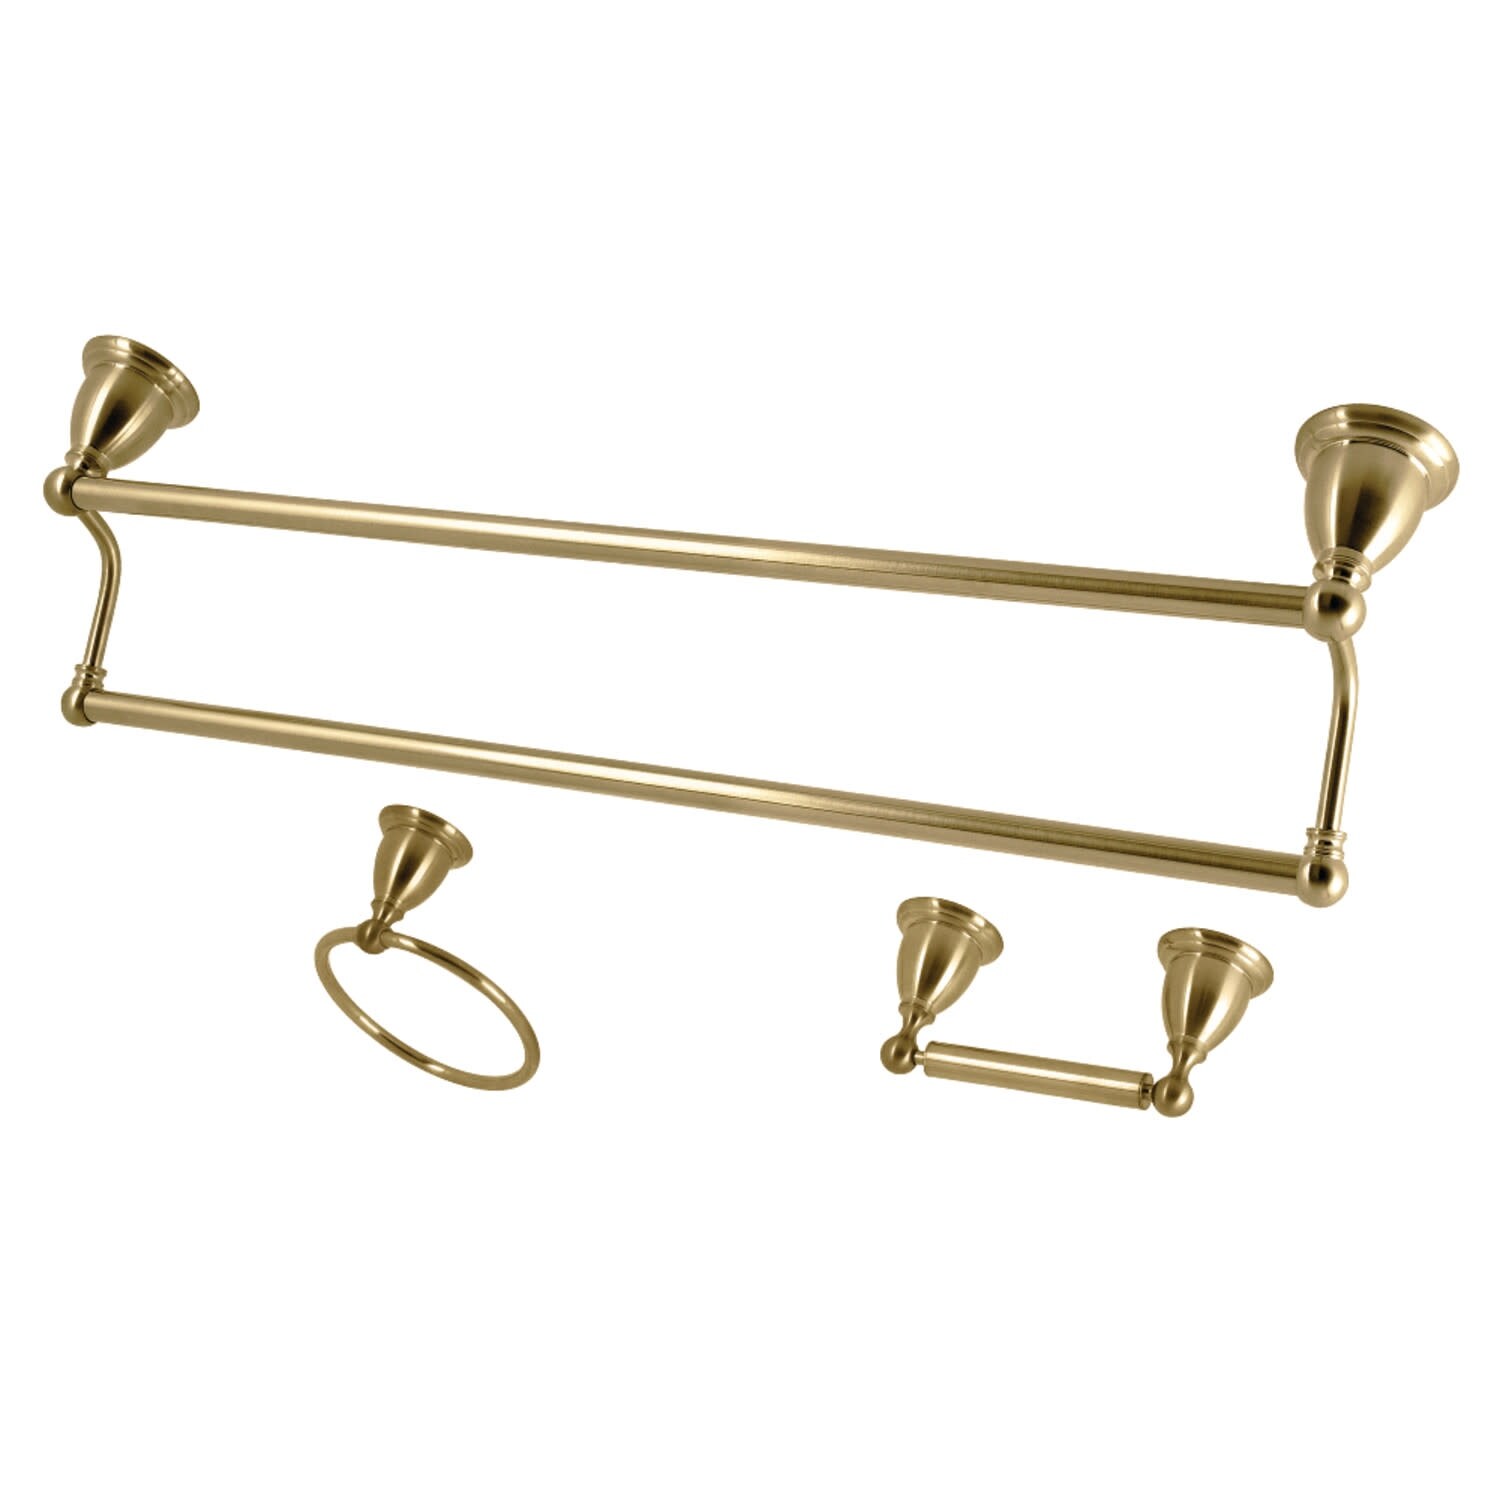 Kingston Brass Heritage 3 Piece Bathroom Package with 24" Towel Bar,